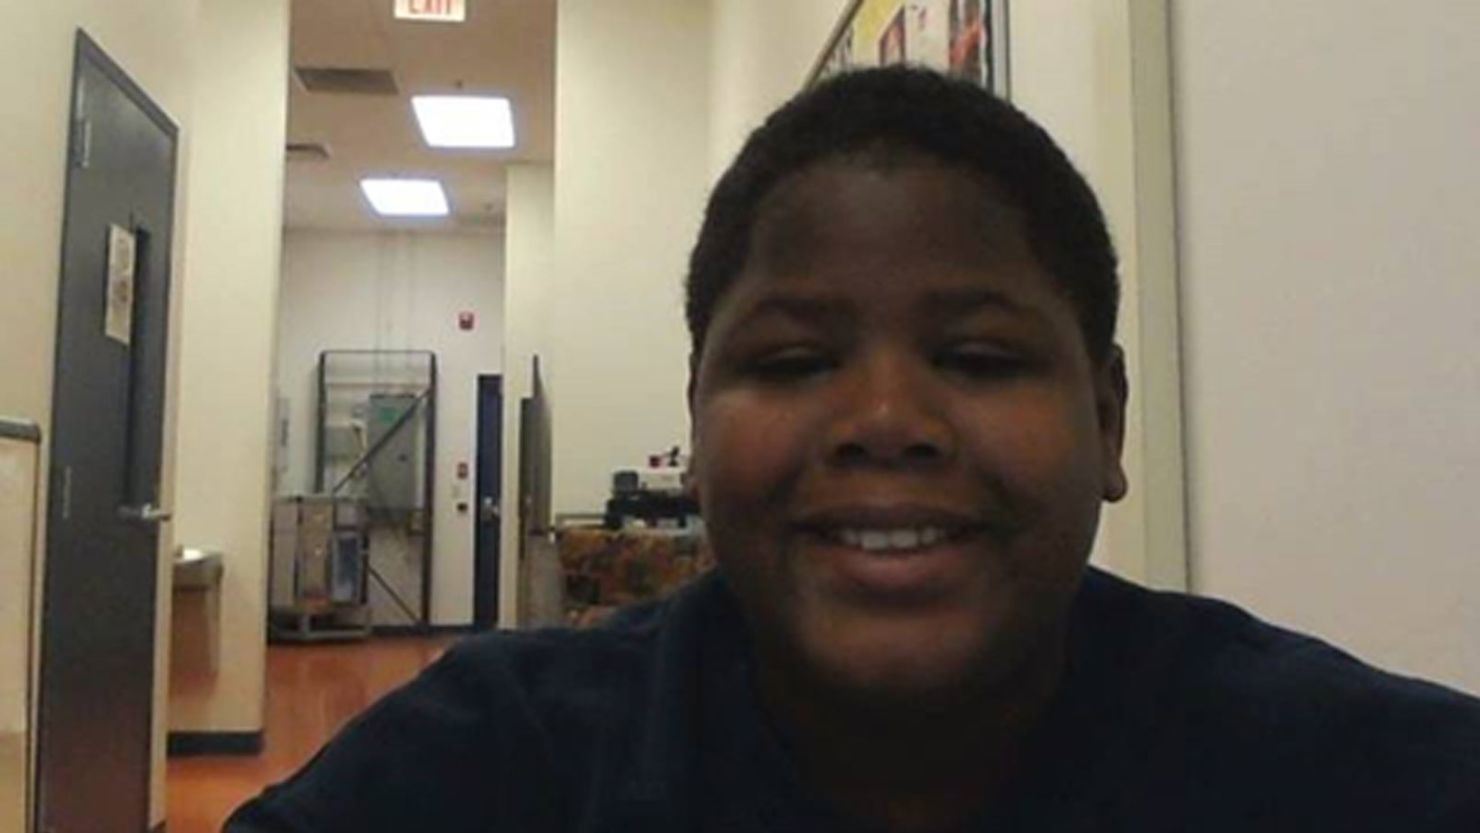 Cornelius Frederick, 16, died in May after he was restrained by staff members at a residential facility in Michigan.